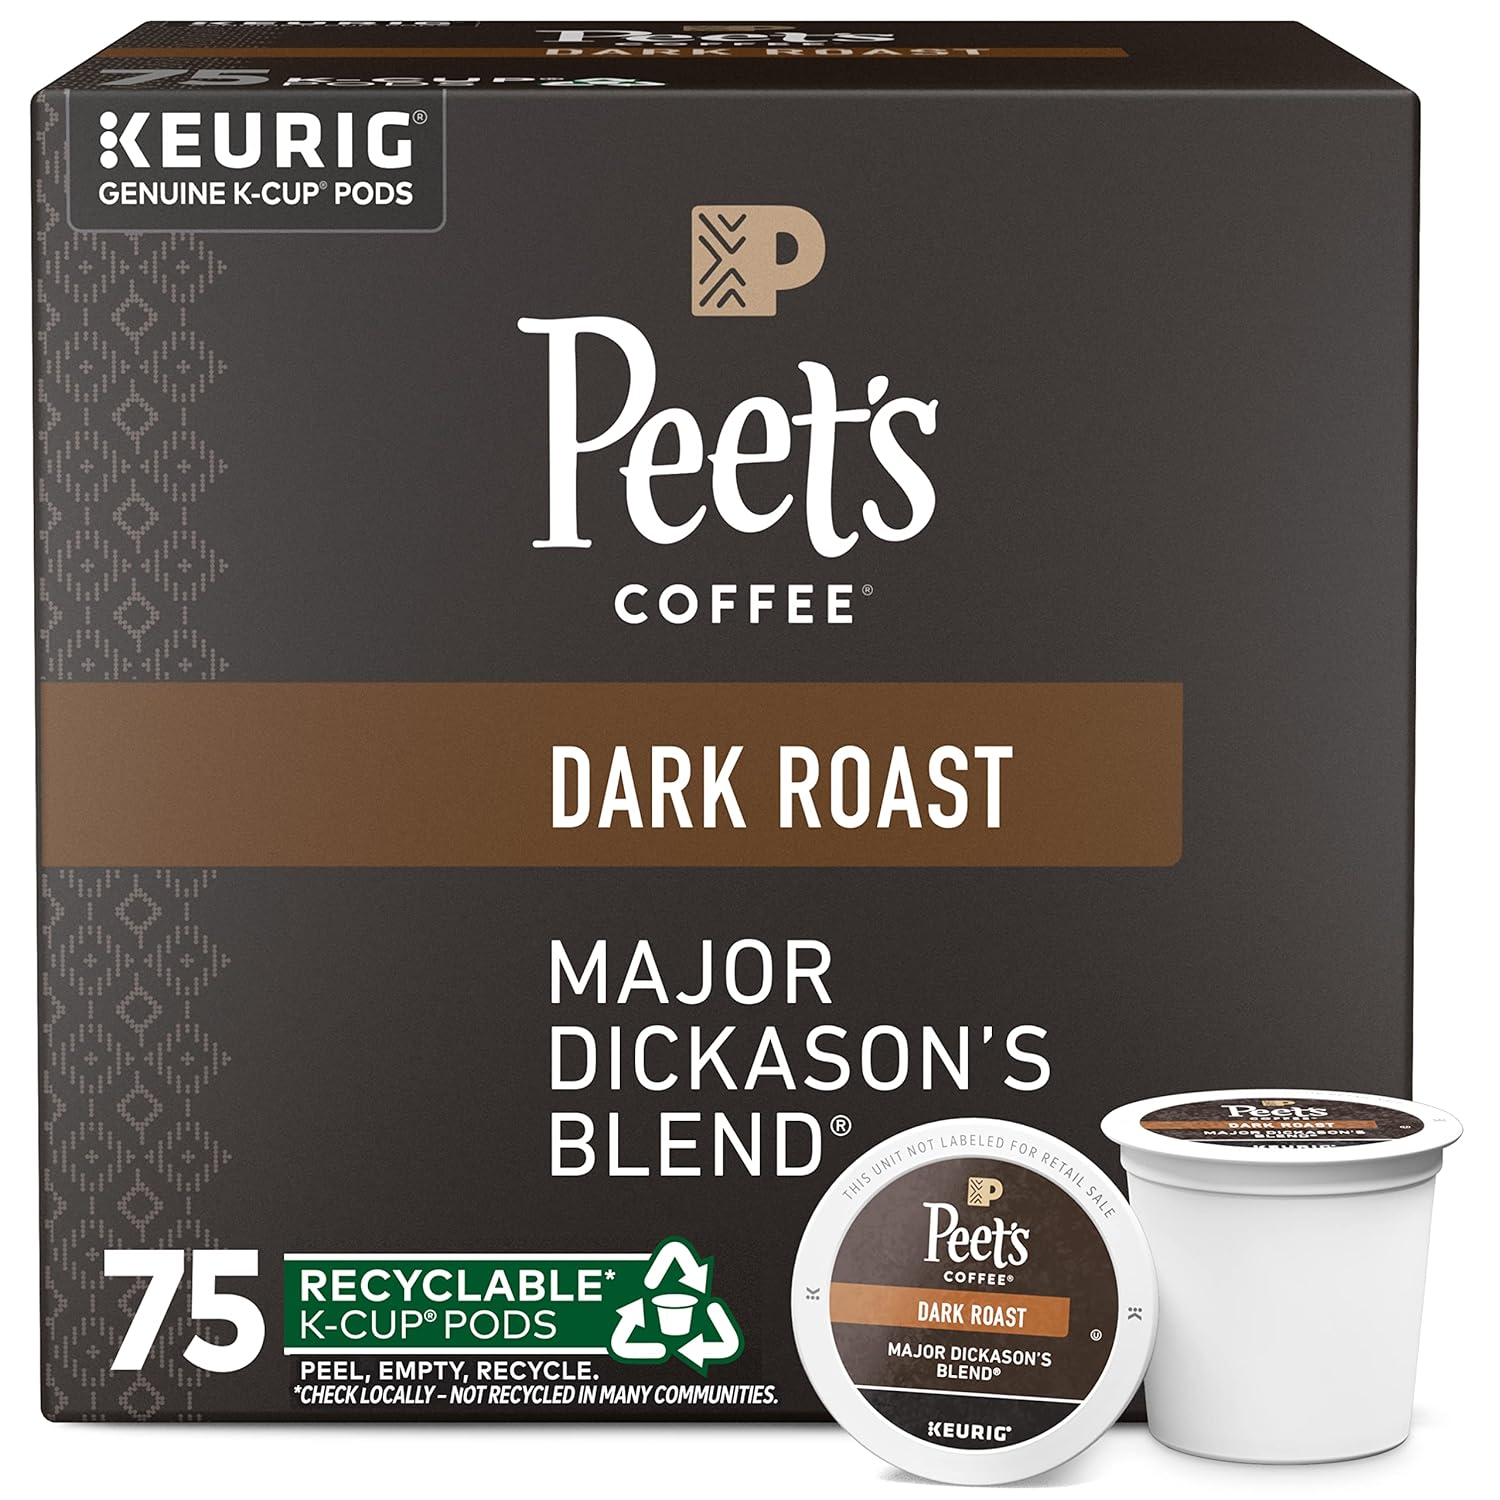 Peets Coffee, Dark Roast K-Cup Pods for Keurig Brewers - Major Dickasons Blend 75 Count (1 Box of 75 K-Cup Pods)